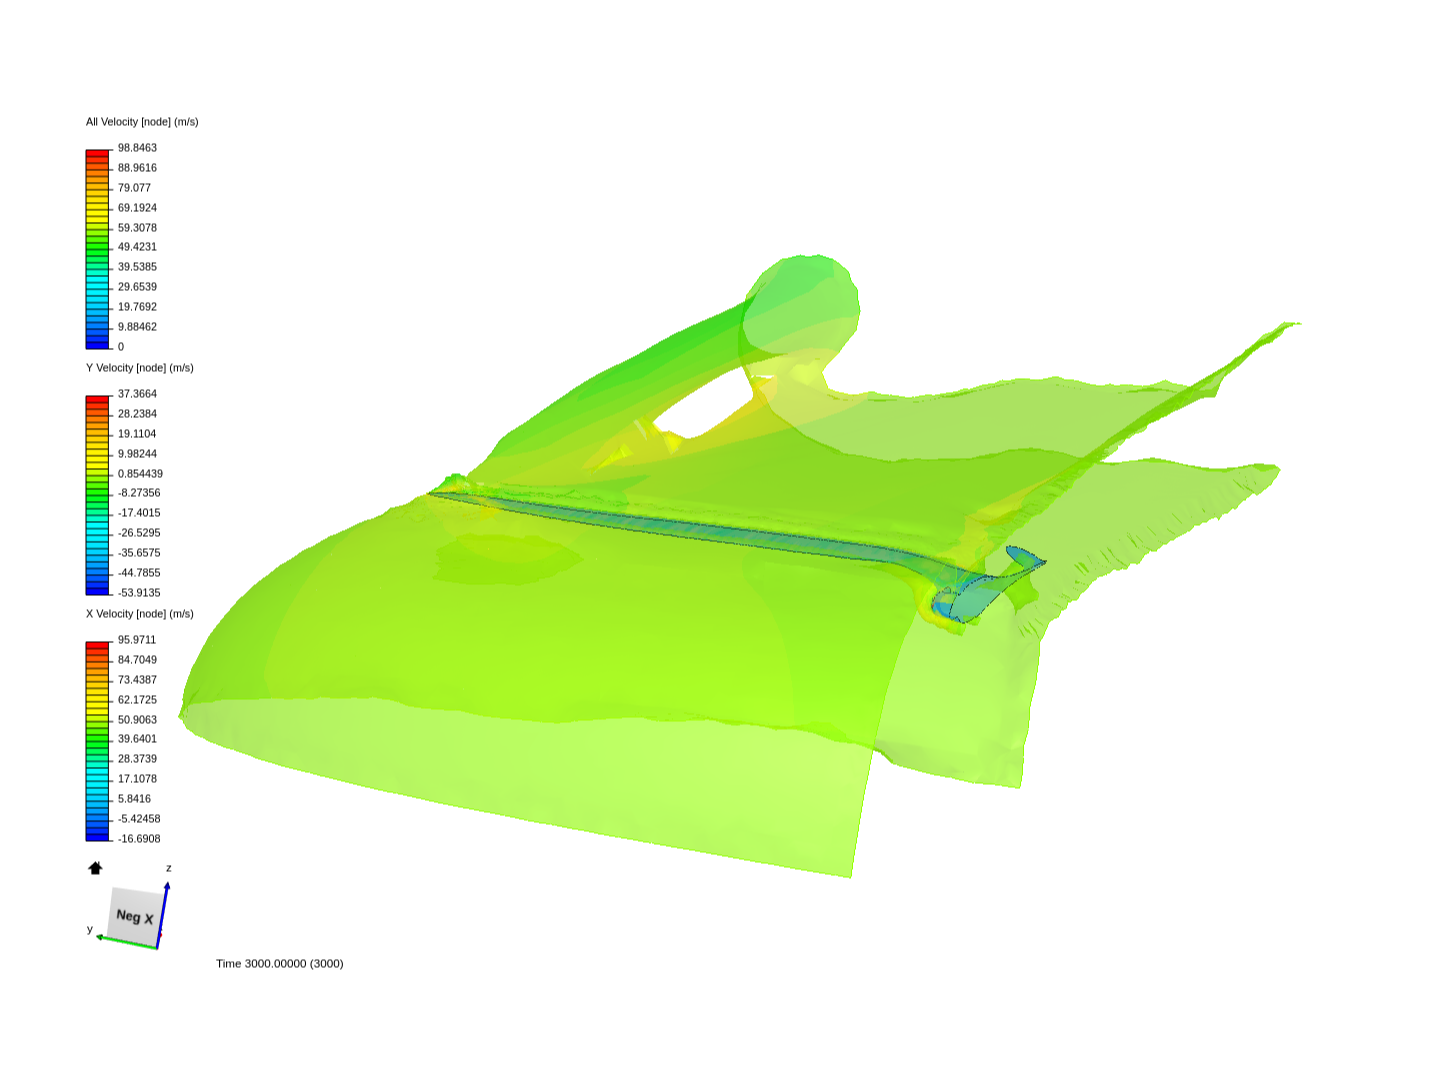 Toothless CFD image